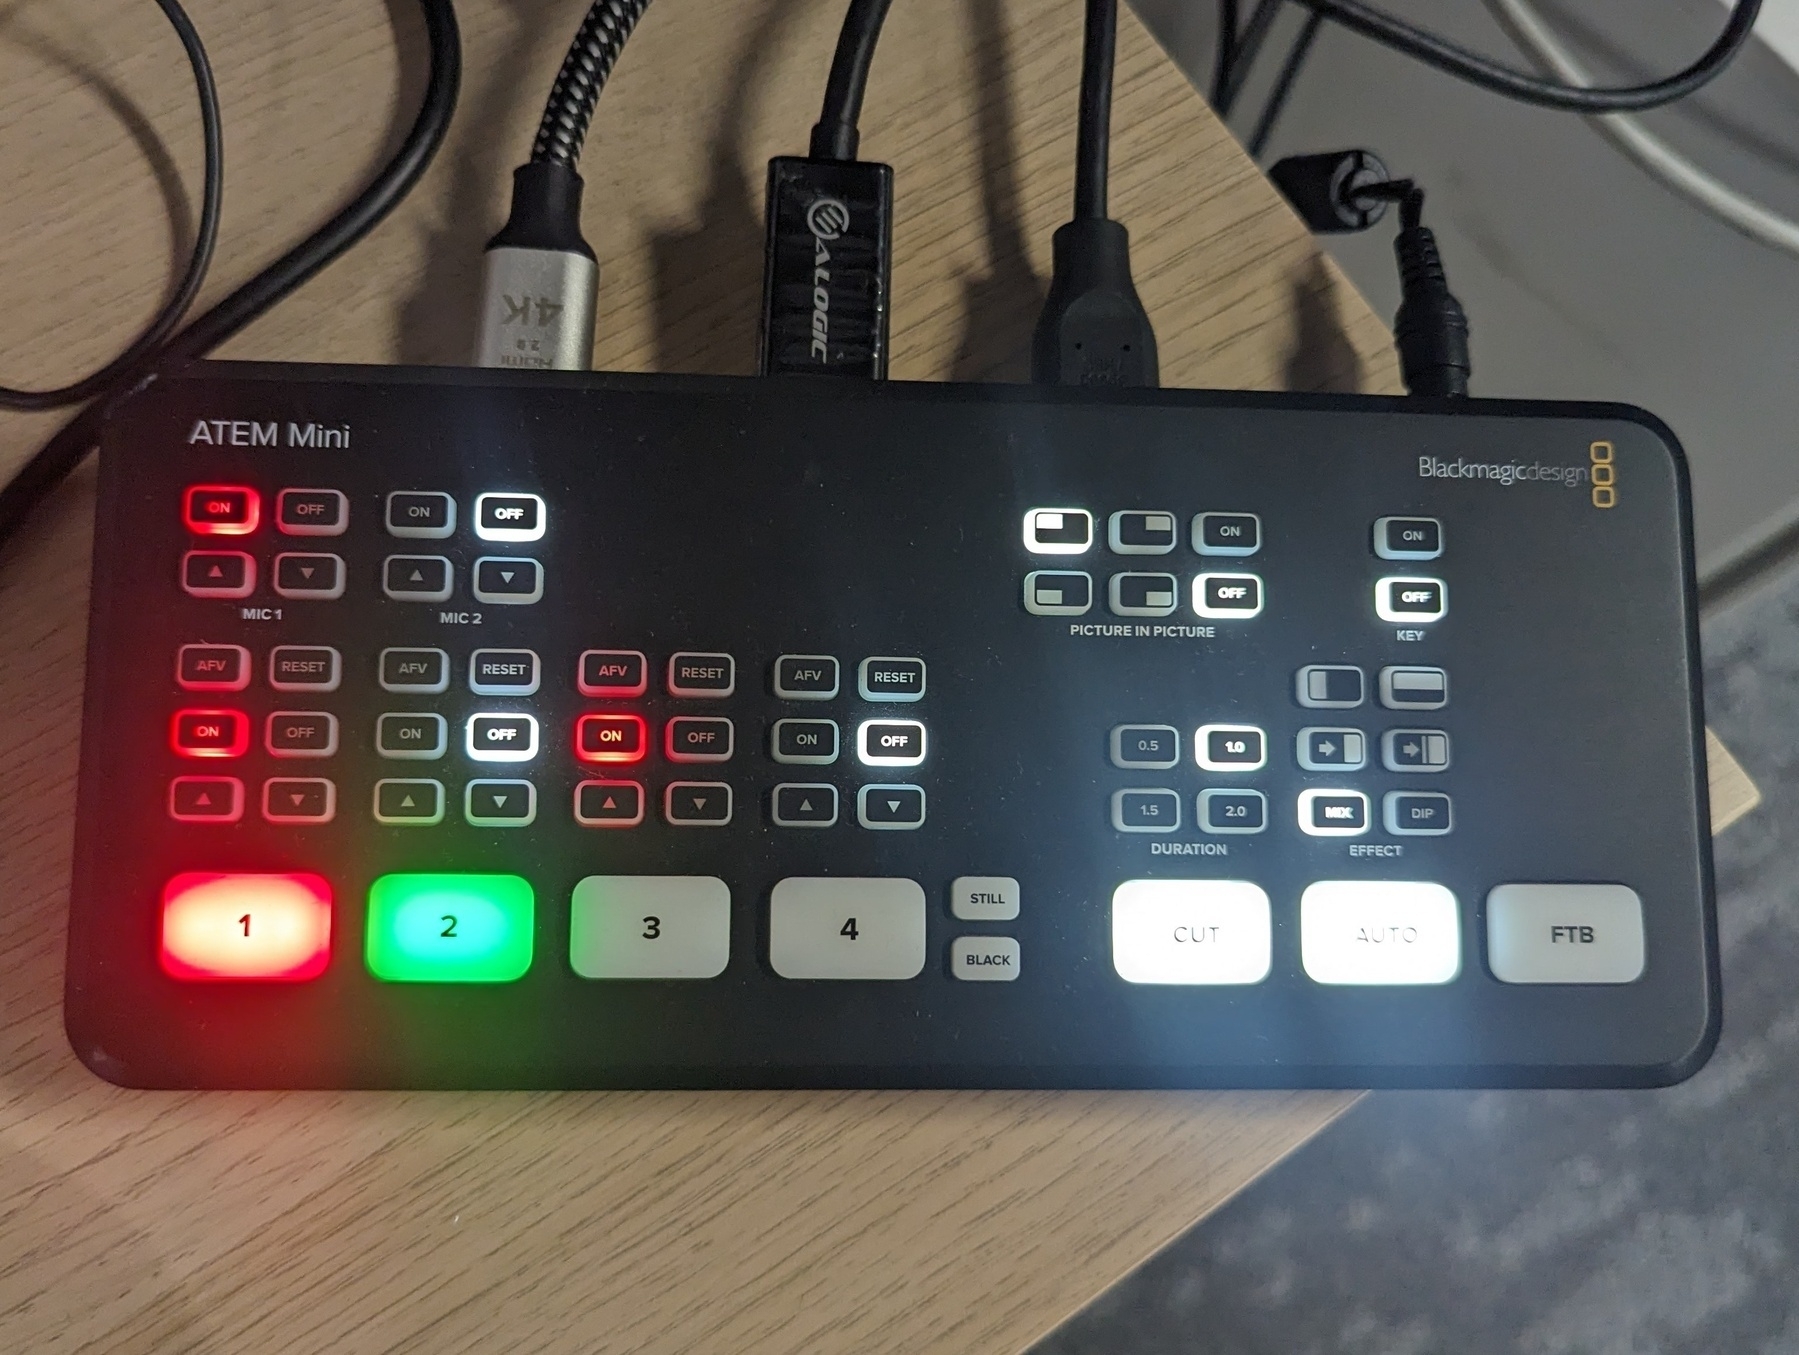 A Blackmagic Design ATEM Mini on a wooden desk with some of the buttons on the front panel illuminated red, green and white. Cables are plugged into the back.